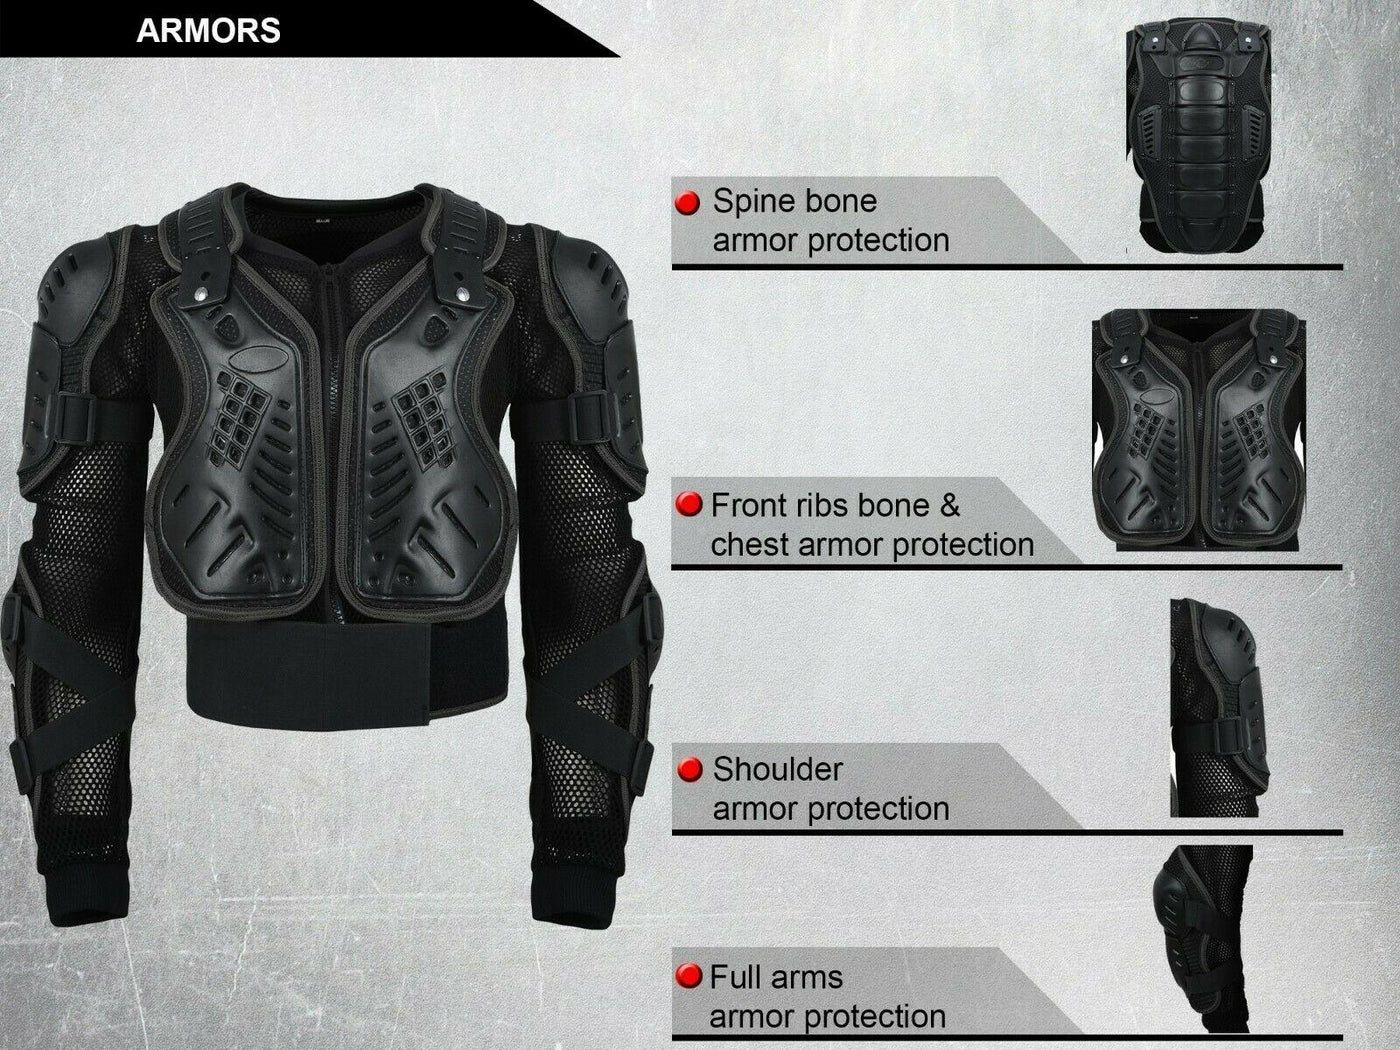 Alpha Motorcycle Body Armor Protection Men Dirt Bike Atv Offroad Motocross dual - Moto Life Products